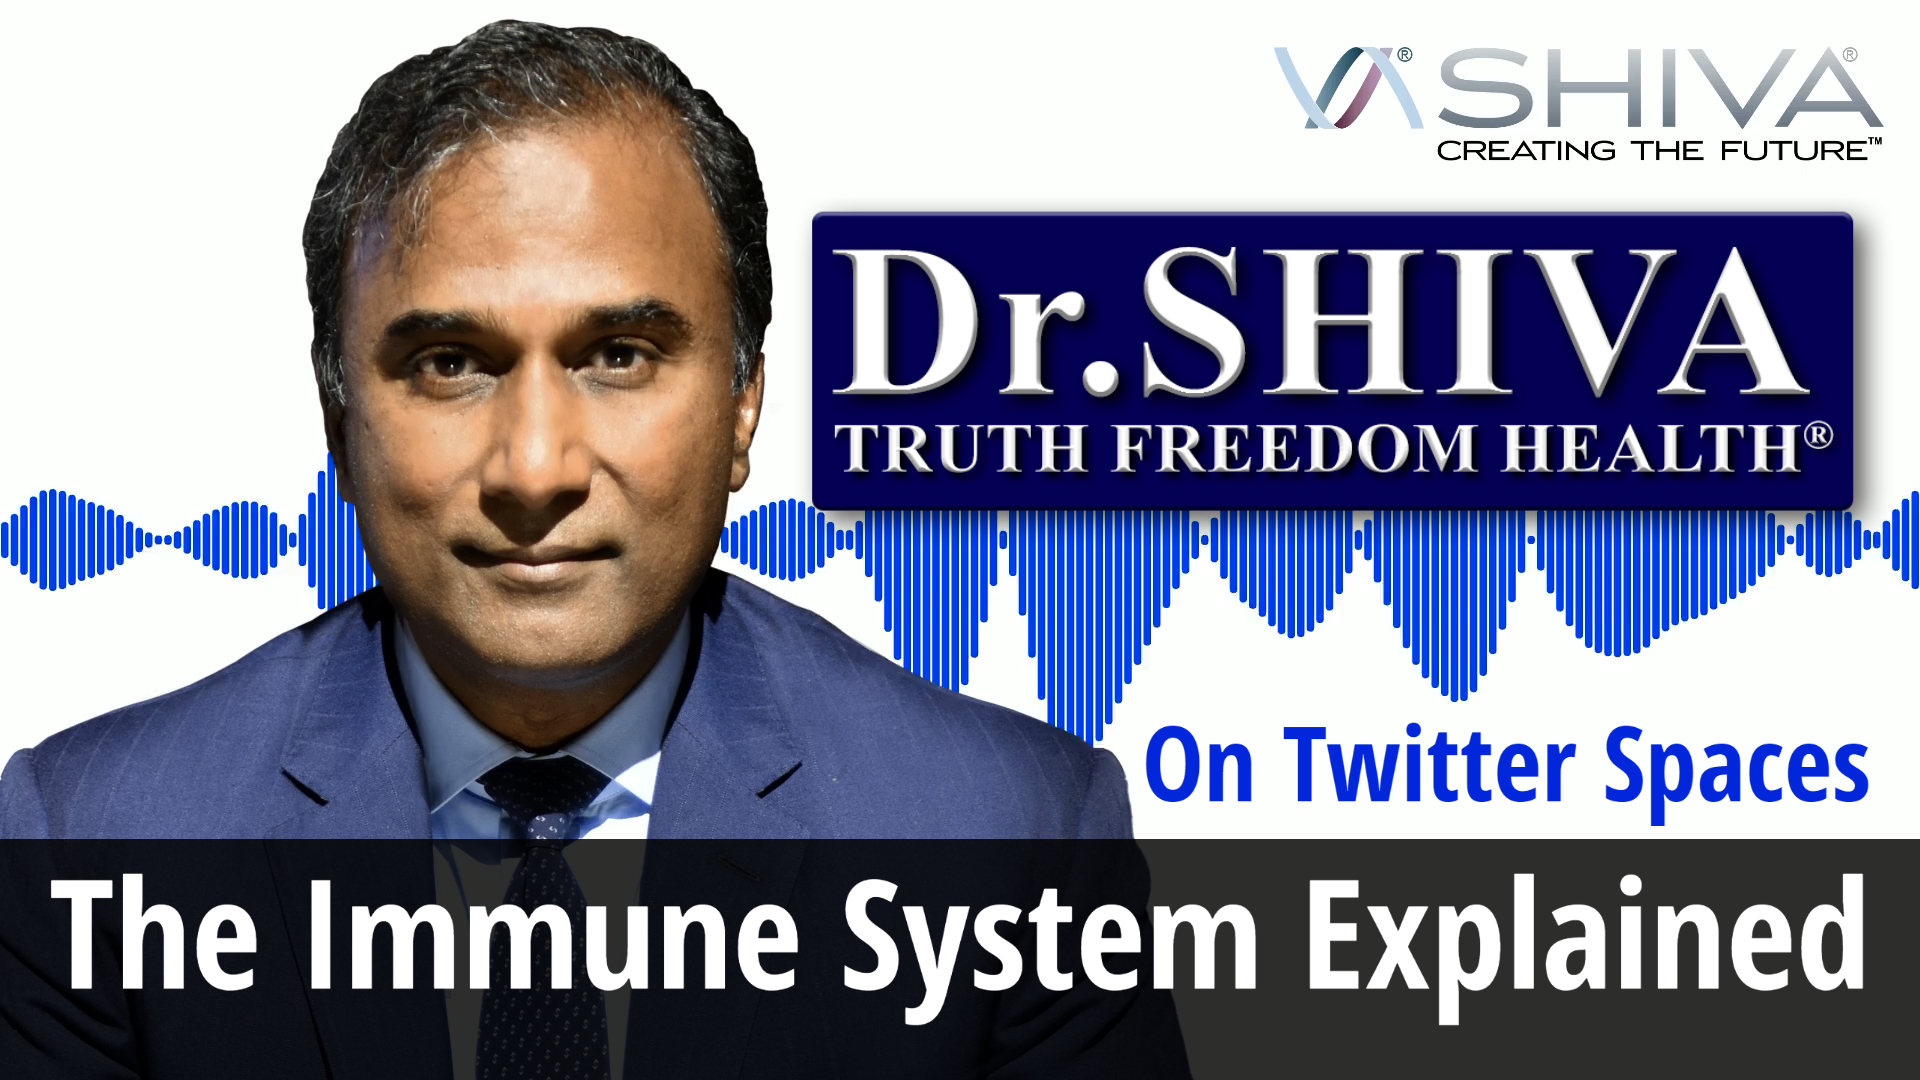 Dr.SHIVA: The Immune System Explained - Educating Twitter Spaces